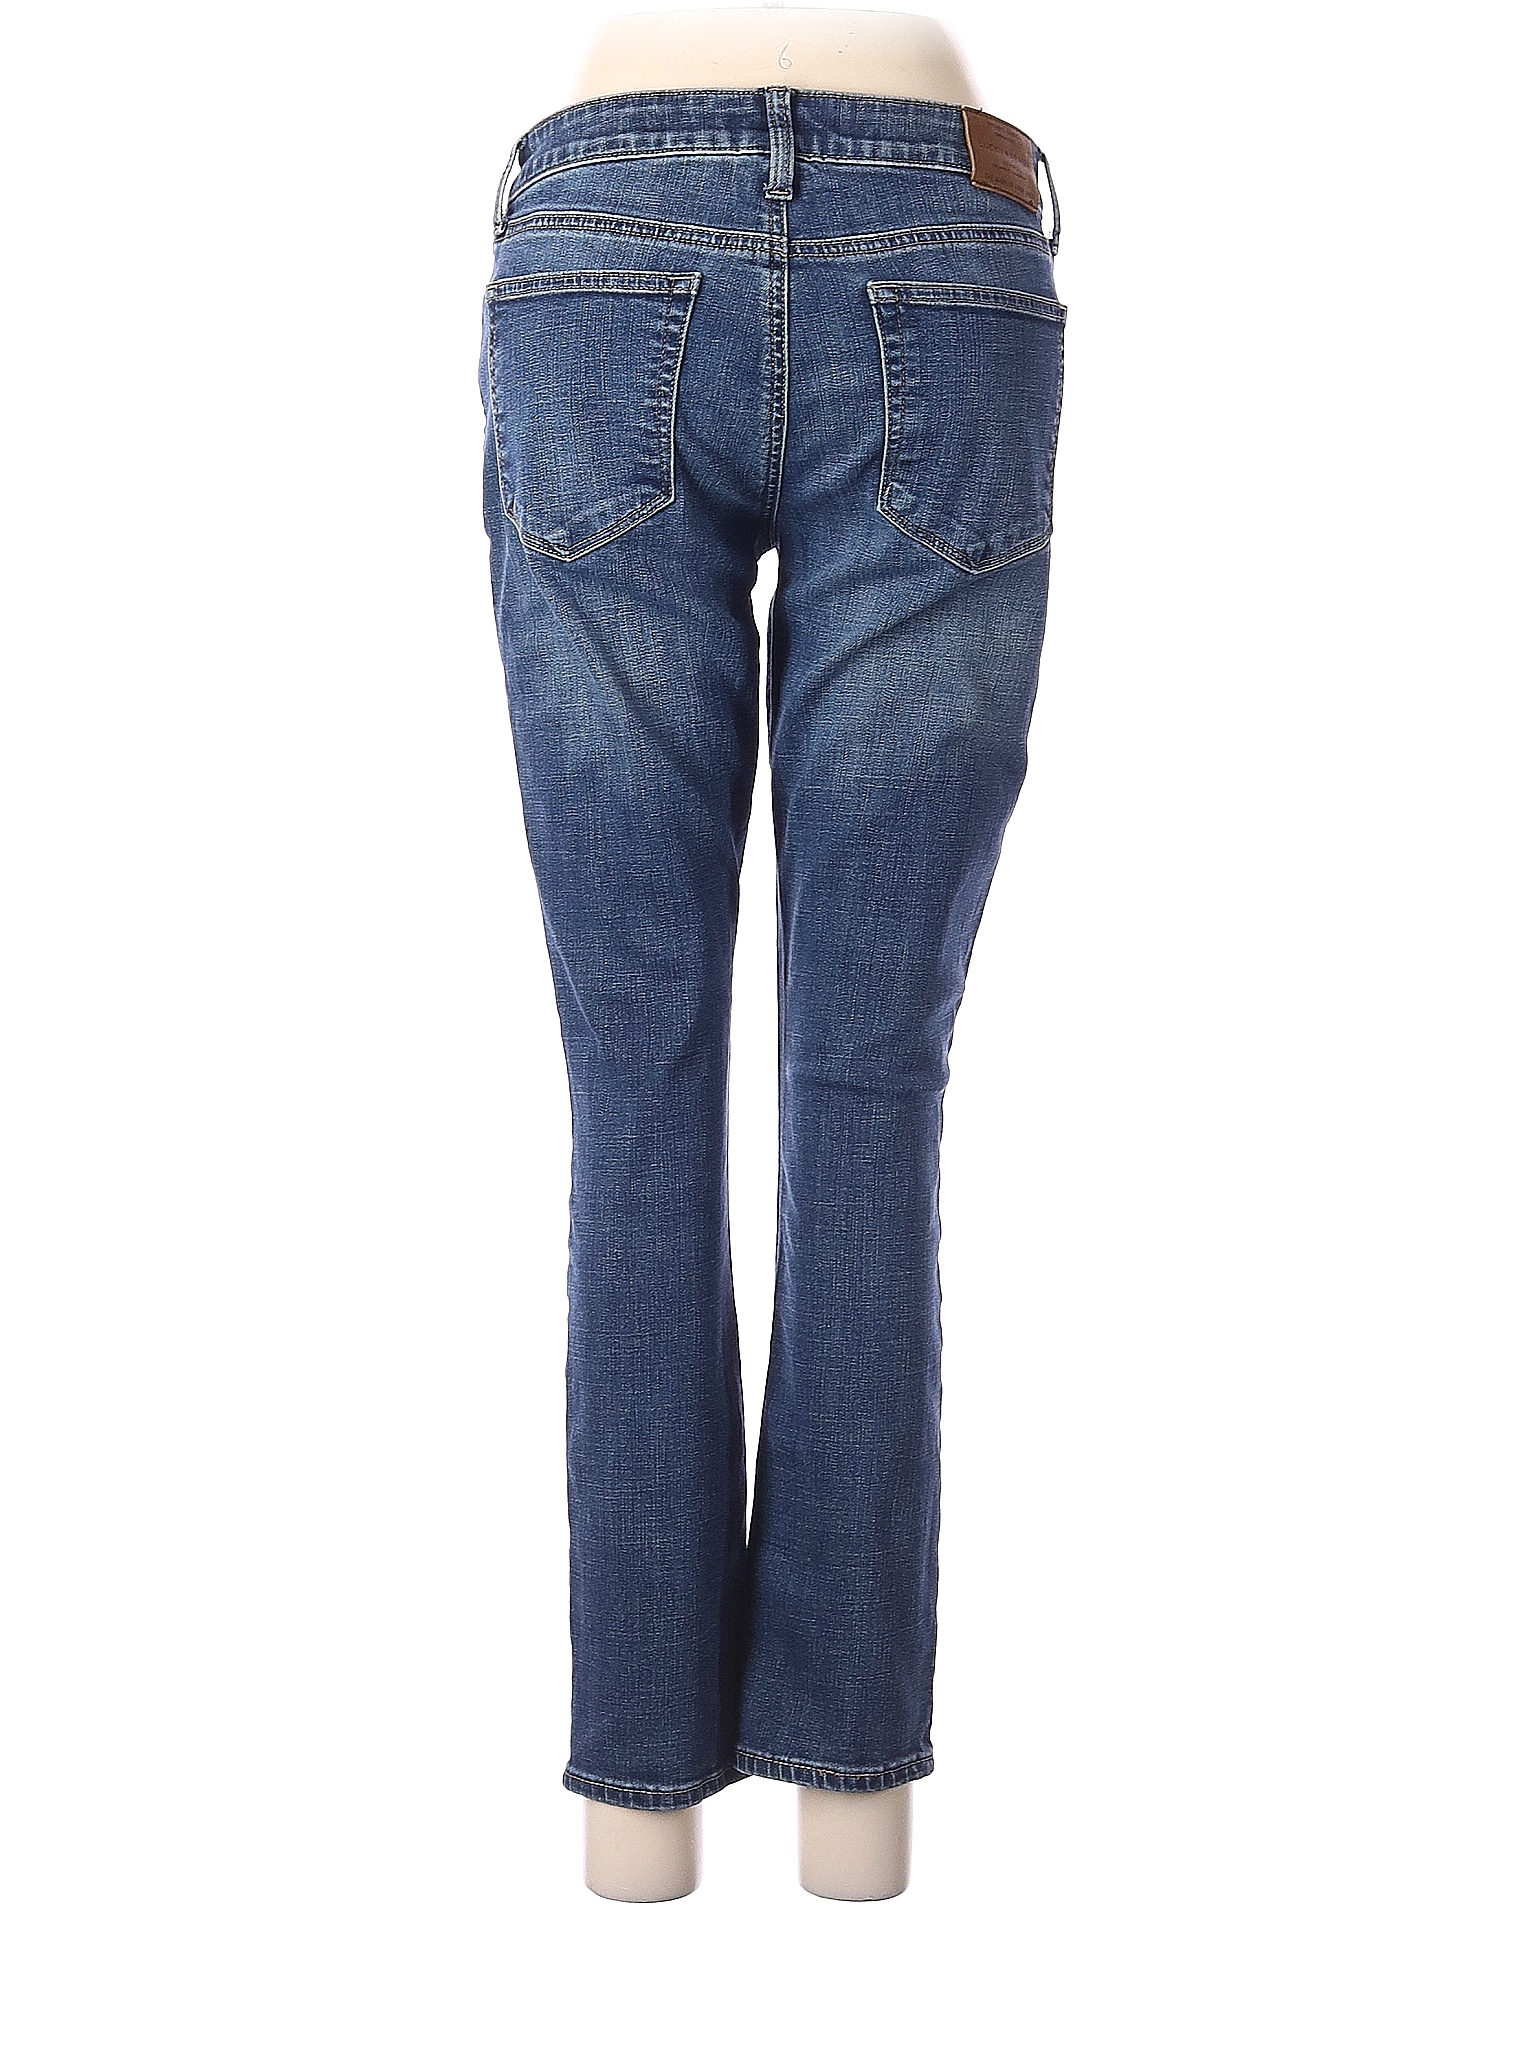 Women's Bootcut Jeans: New & Used On Sale Up To 90% Off | thredUP